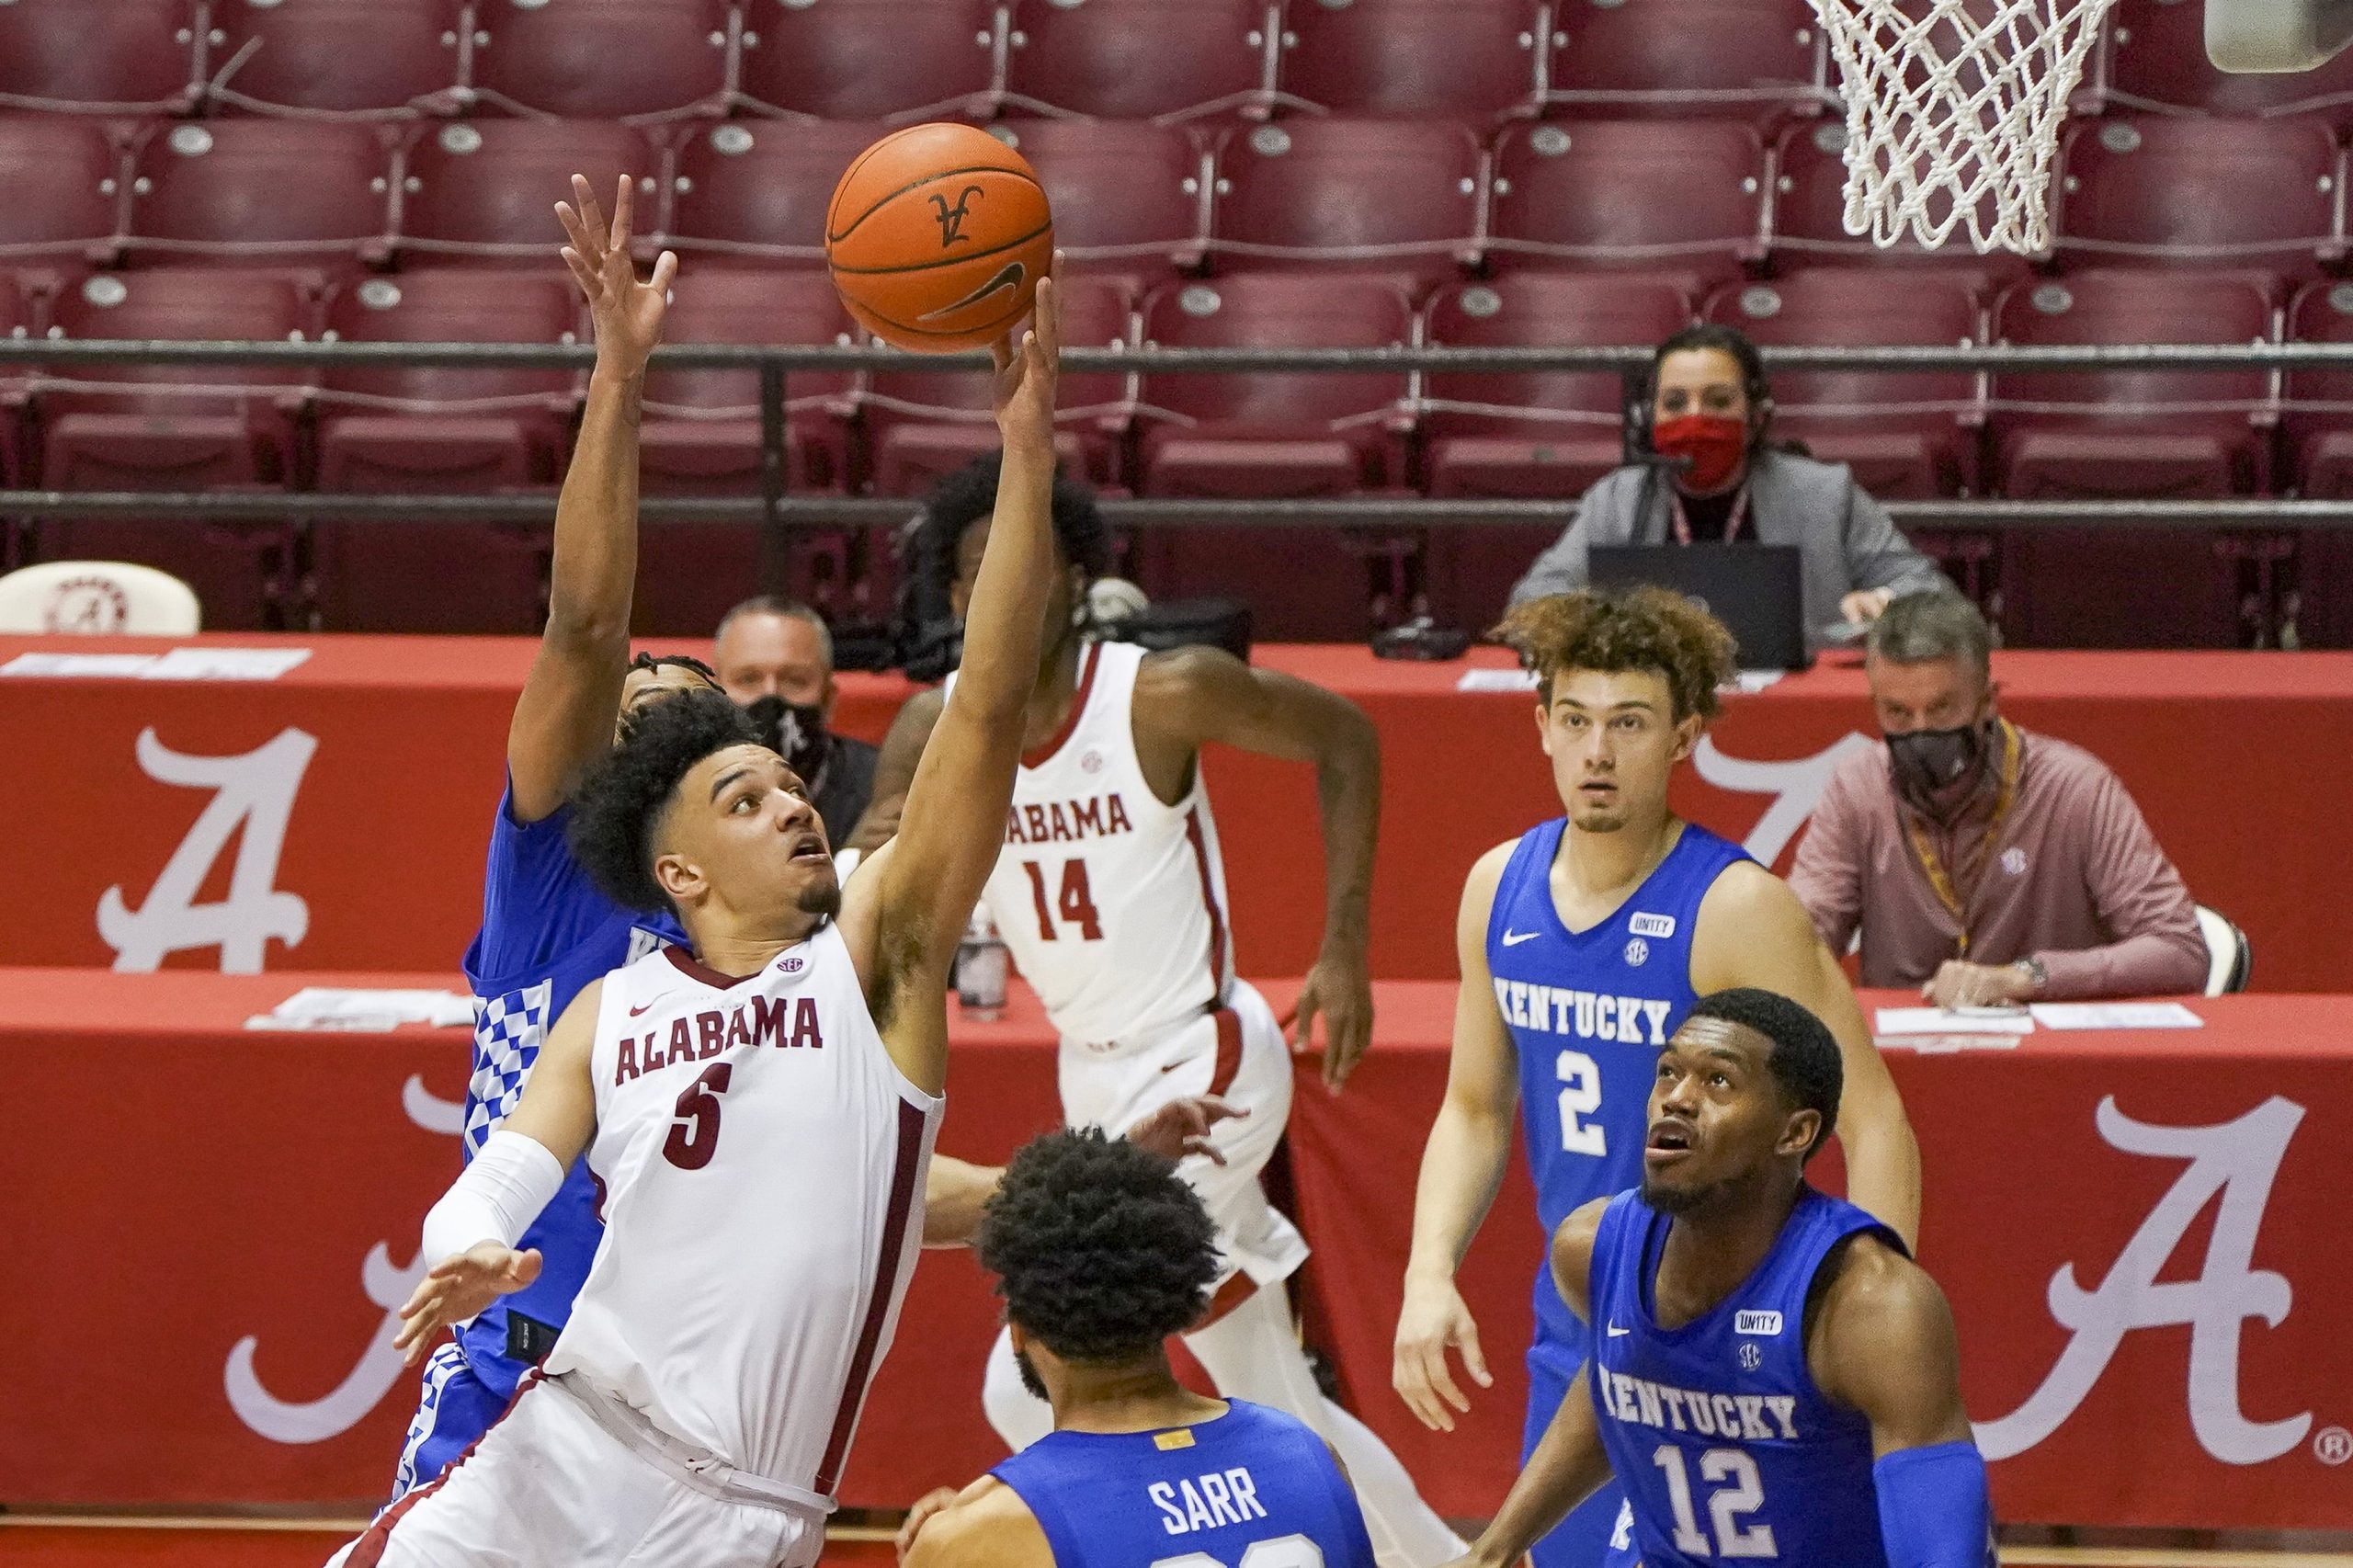 Alabama Crimson Tide guard Jaden Shackelford (5) goes to the basket against Kentucky Wildcats during the second half at Coleman Coliseum.